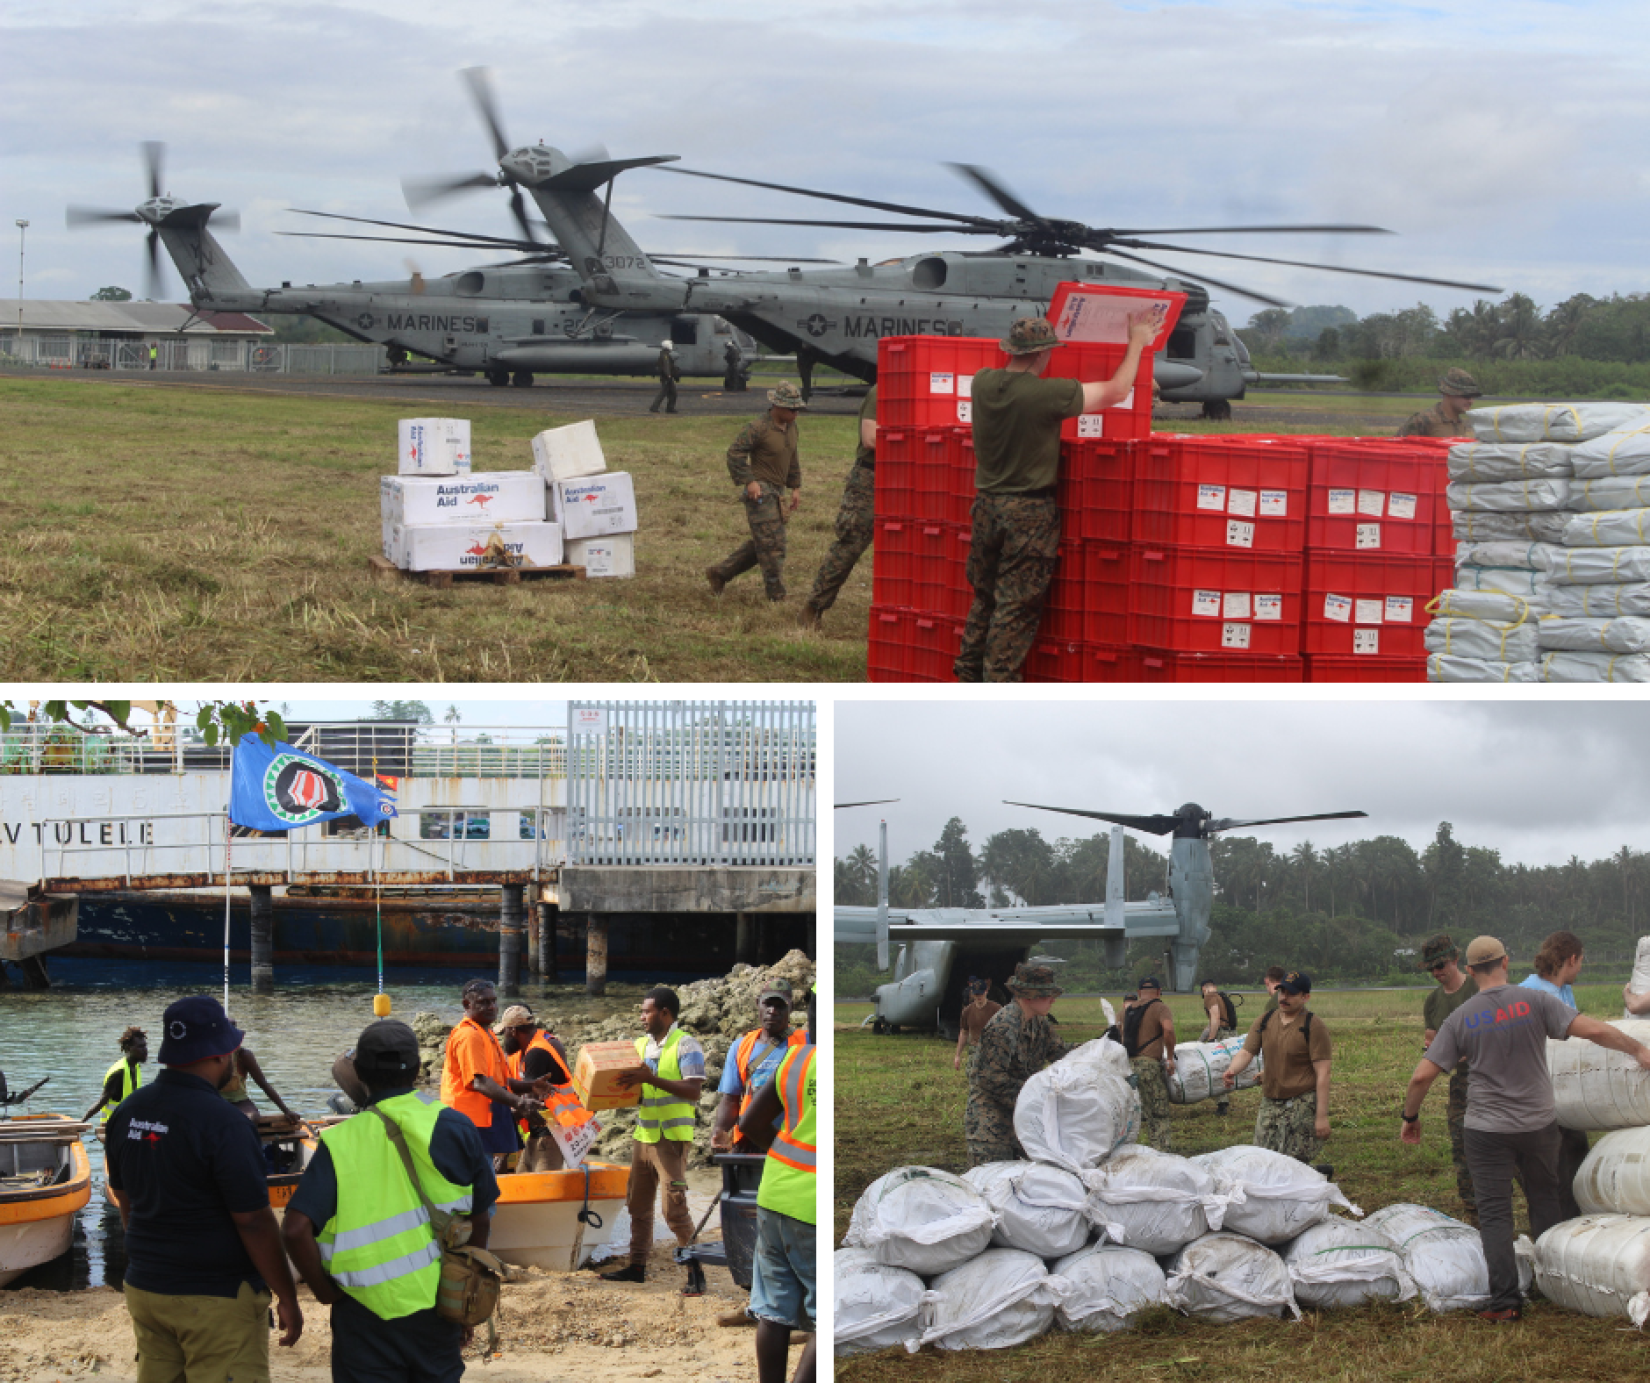 Mt Bagana in the Autonomous Region of Bougainville (AROB), humanitarians are on the ground coordinating the delivery of relief supplies and ensuring no one is left behind